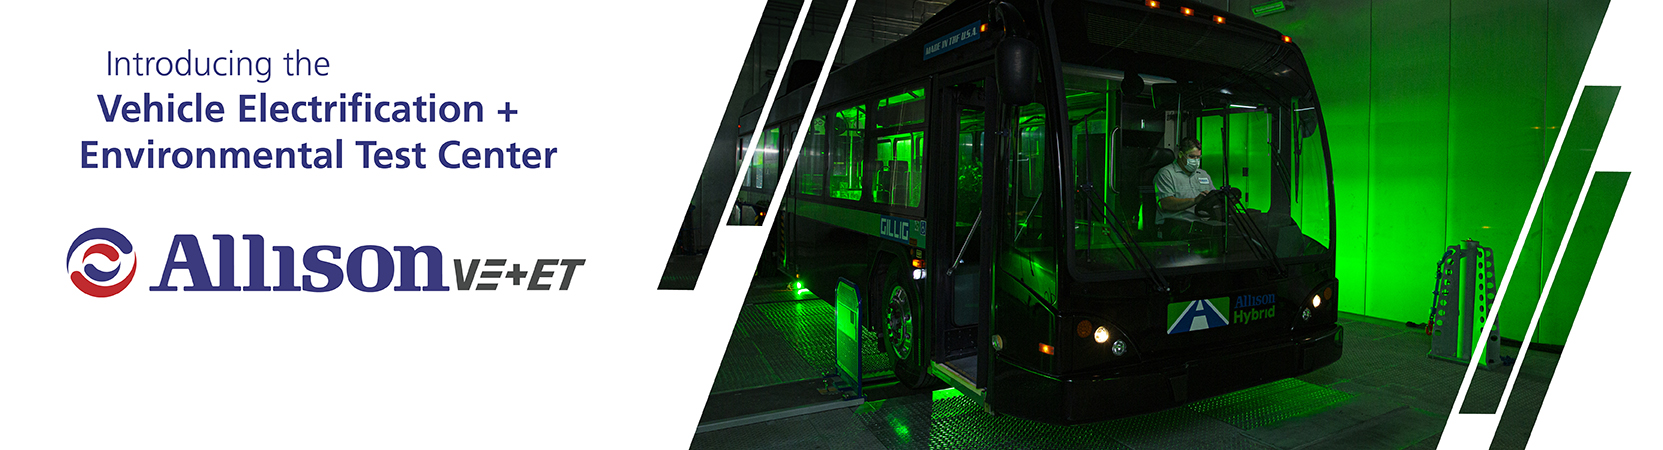 A black bus is shown on a dyne with green lights all around it. Text reads "Introducing Vehicle Electrification + Environmental Test Center"